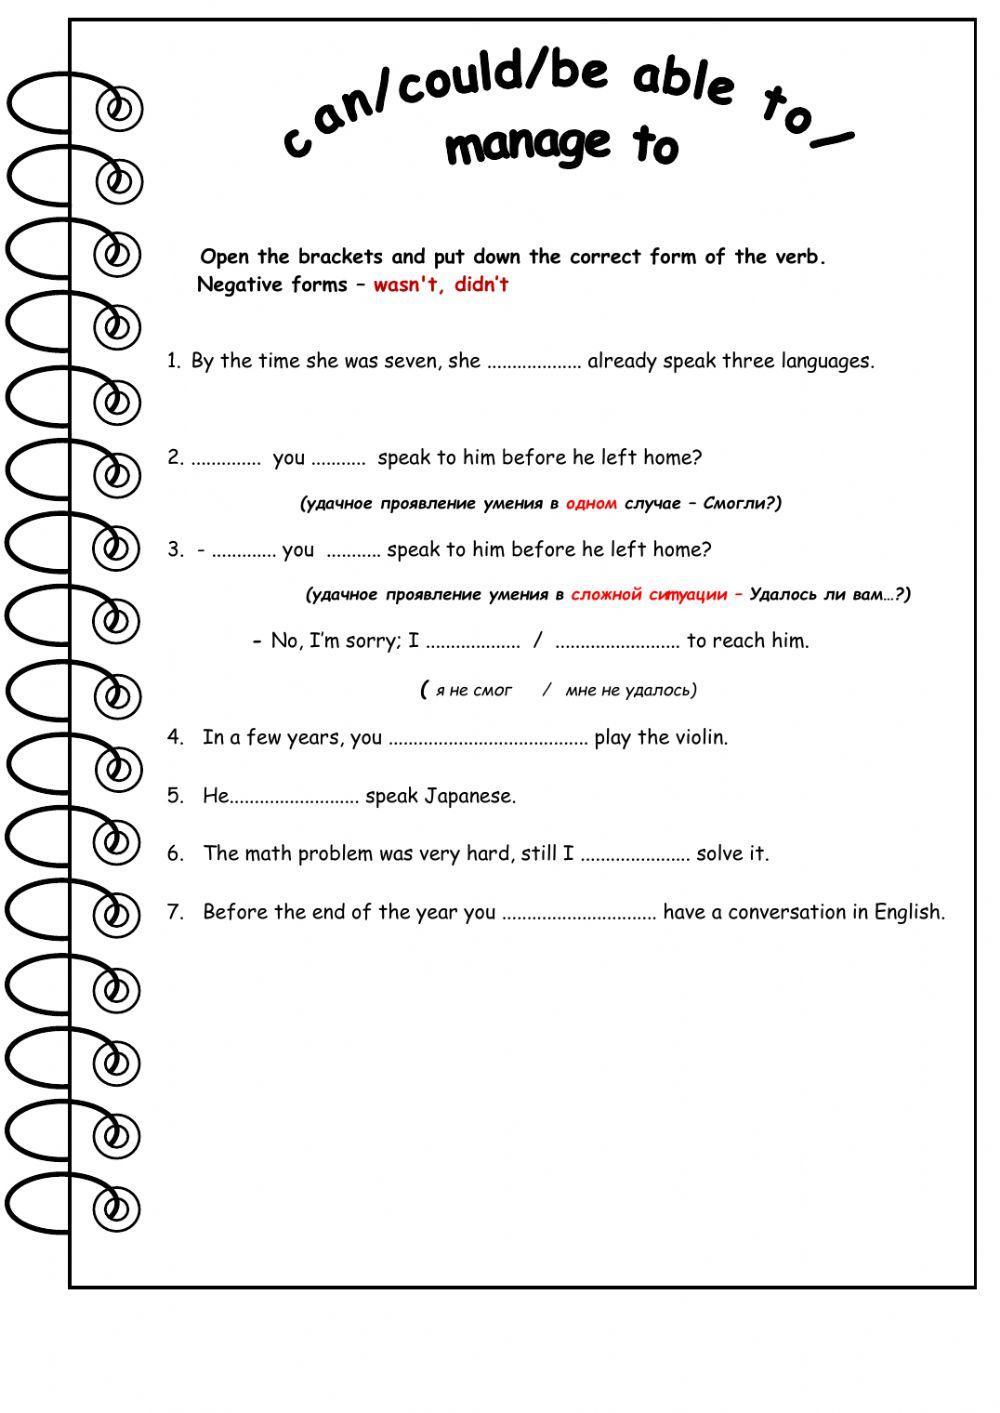 Can-could-be able to-manage to worksheet | Live Worksheets